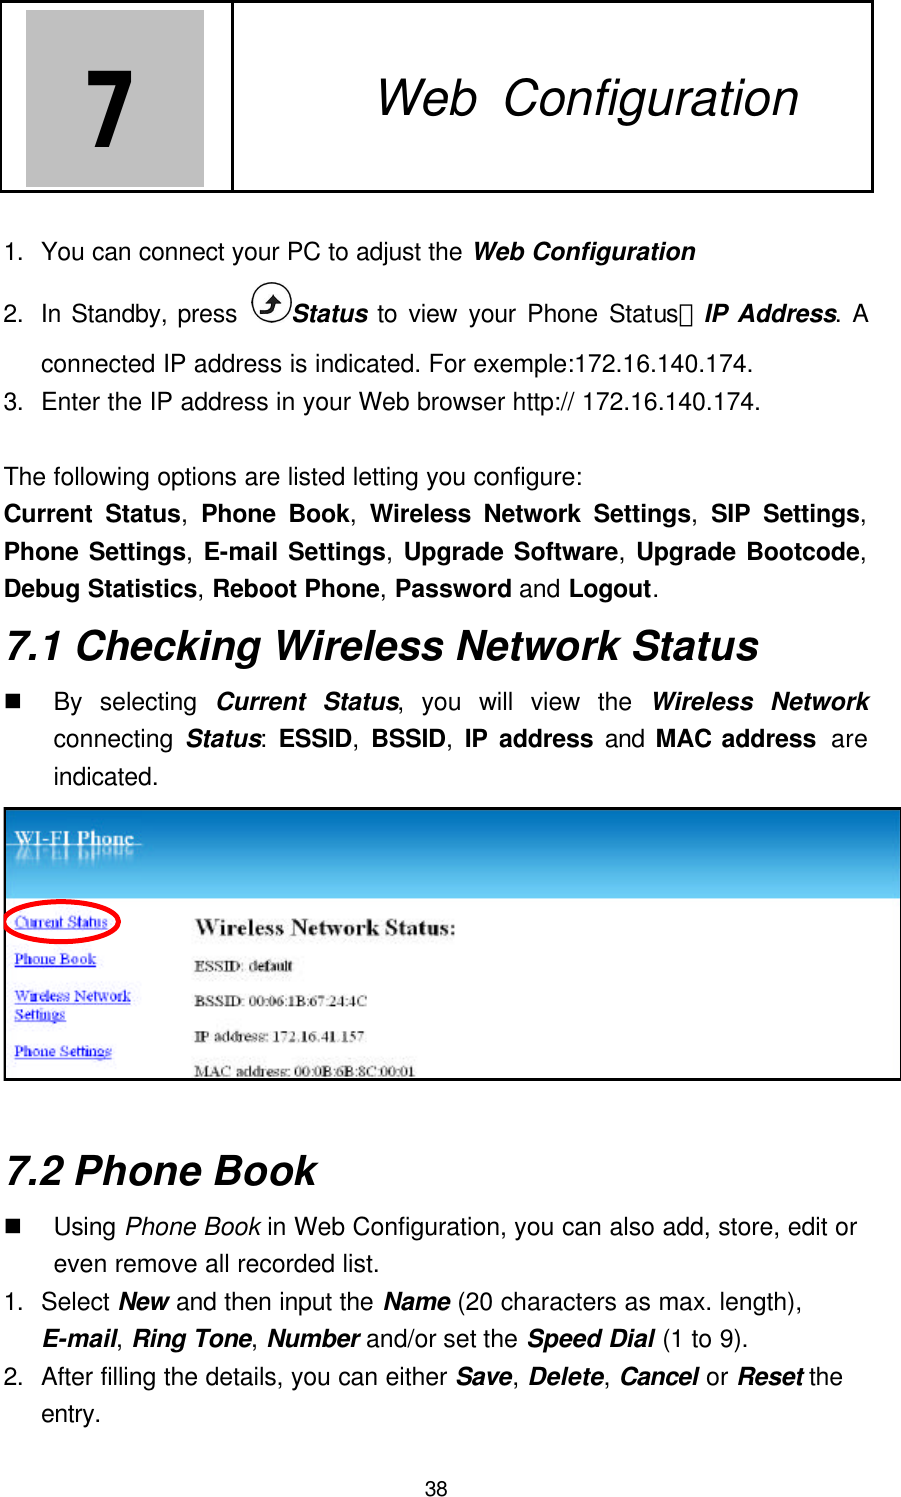  38 7   7. Web Configuration  1. You can connect your PC to adjust the Web Configuration 2. In Standby, press  Status to view your Phone Status－IP Address. A connected IP address is indicated. For exemple:172.16.140.174. 3. Enter the IP address in your Web browser http:// 172.16.140.174.  The following options are listed letting you configure: Current Status,  Phone Book,  Wireless Network Settings, SIP Settings, Phone Settings, E-mail Settings, Upgrade Software, Upgrade Bootcode, Debug Statistics, Reboot Phone, Password and Logout. 7.1 Checking Wireless Network Status n By selecting Current Status, you will view the Wireless Network connecting  Status: ESSID, BSSID, IP address and MAC address  are indicated.  7.2 Phone Book n Using Phone Book in Web Configuration, you can also add, store, edit or even remove all recorded list. 1. Select New and then input the Name (20 characters as max. length), E-mail, Ring Tone, Number and/or set the Speed Dial (1 to 9). 2. After filling the details, you can either Save, Delete, Cancel or Reset the entry. 